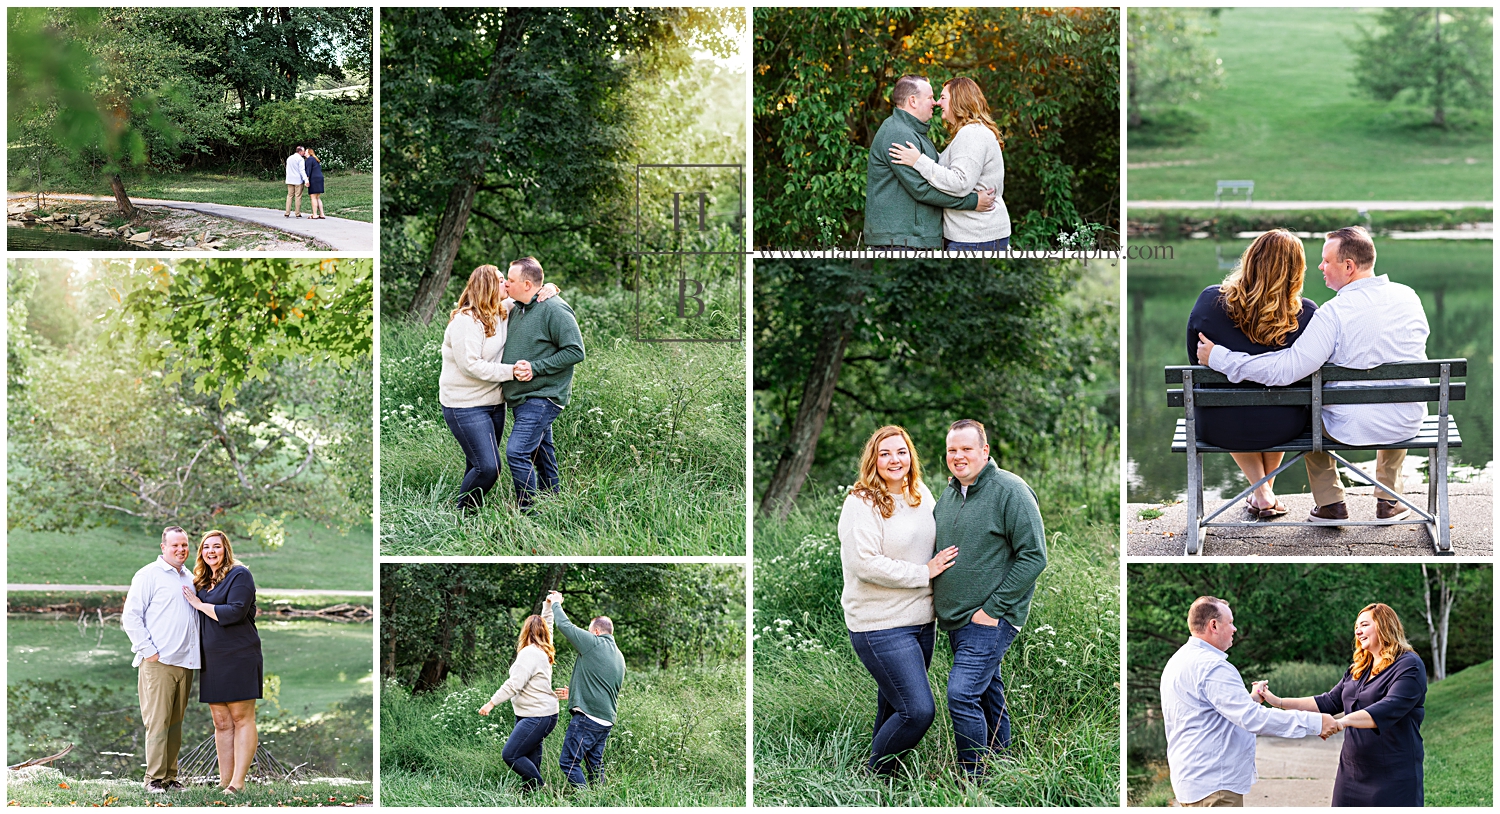 Collage of couple posing for engagement photos in green foliage with golden light behind them.